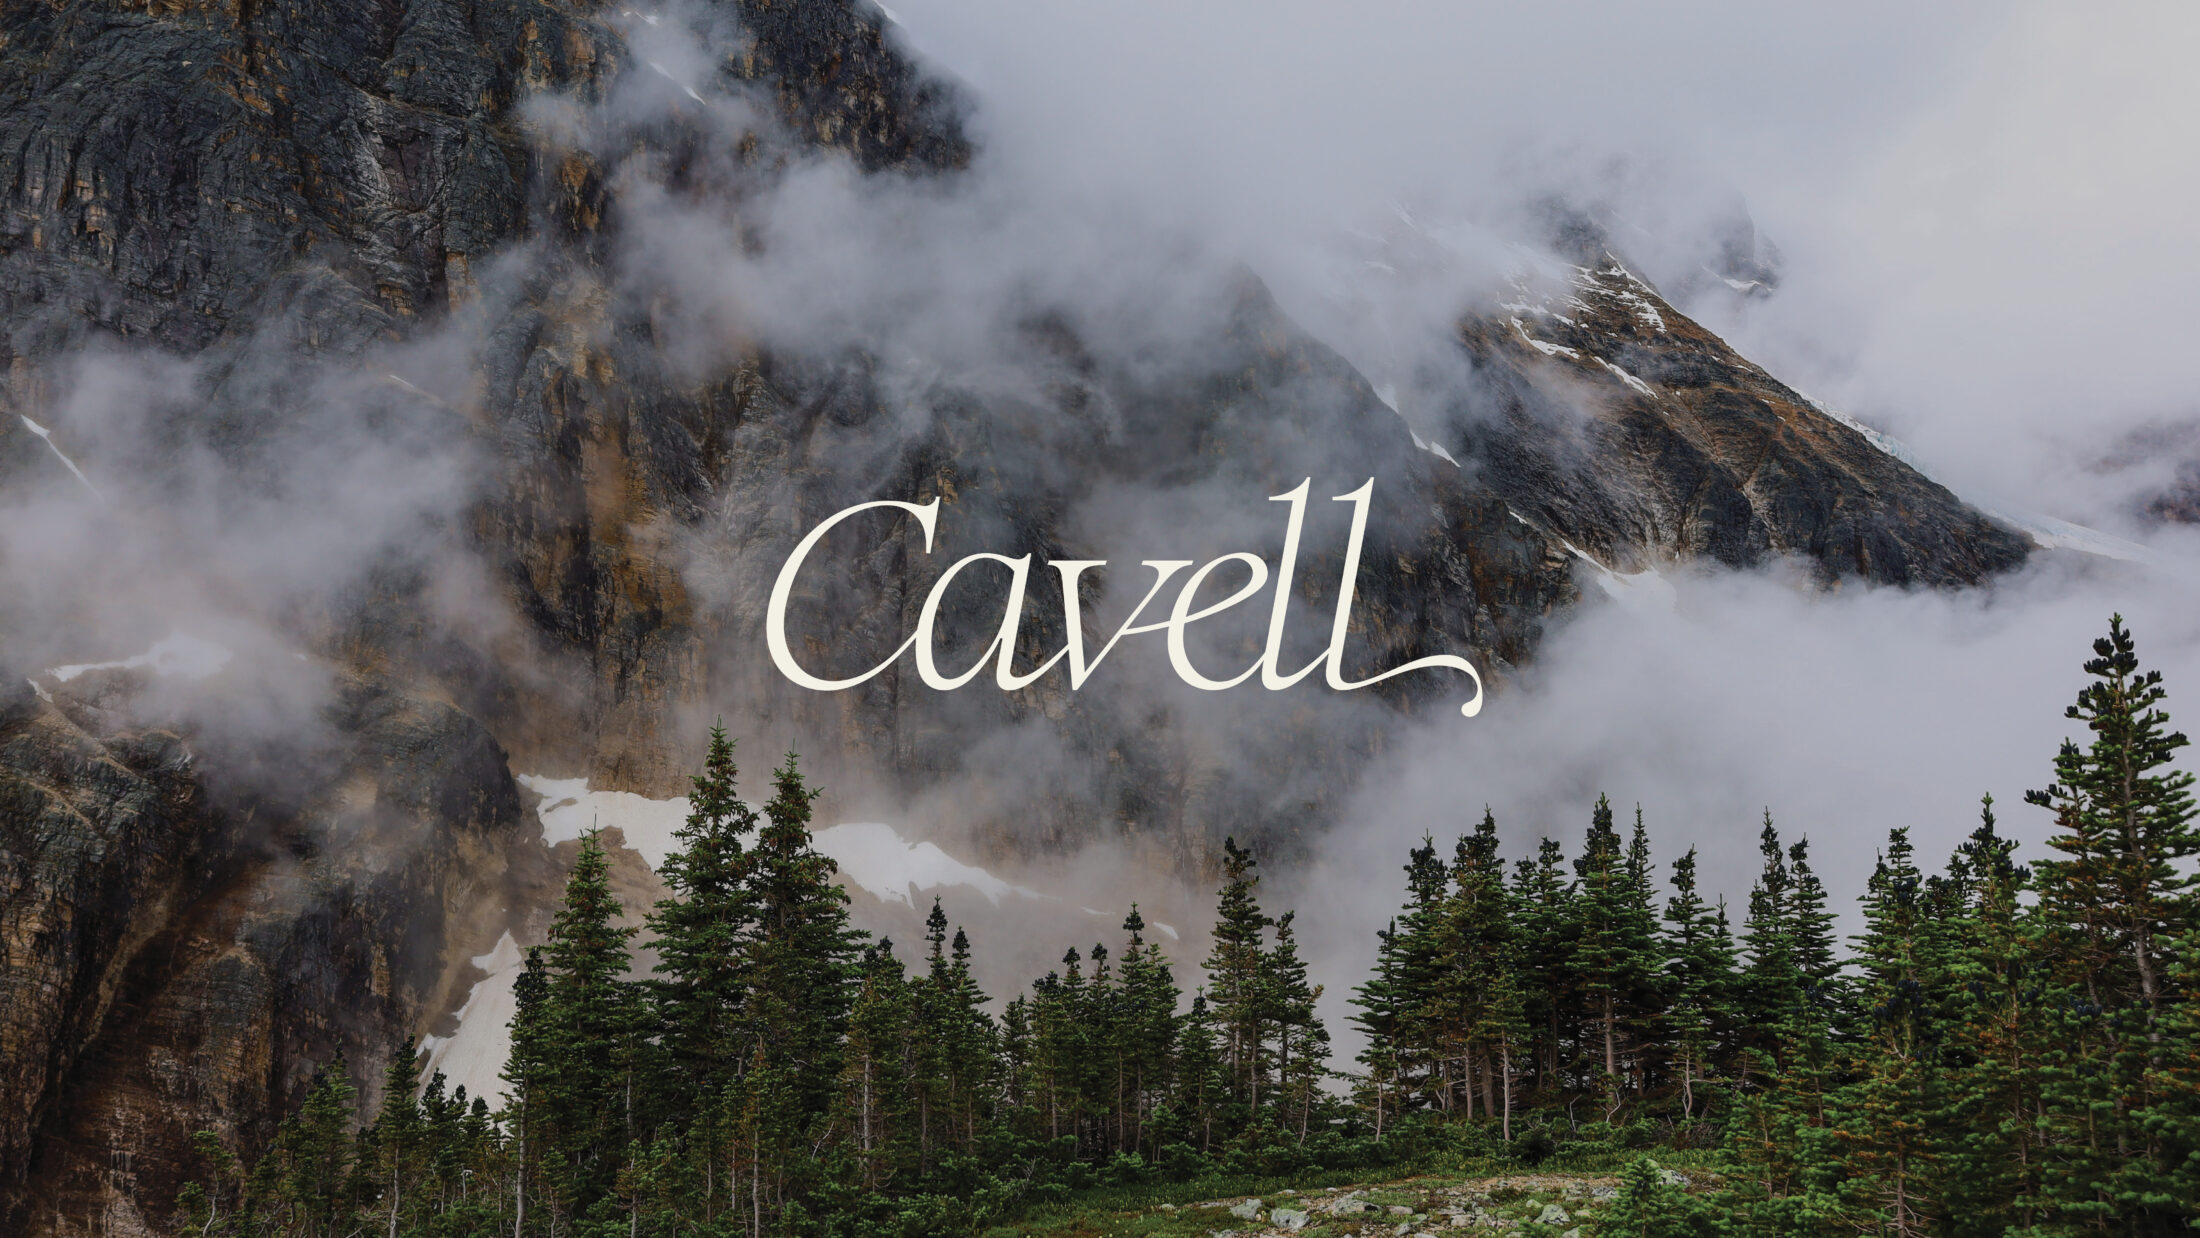 Cavell: Boutique Insurance